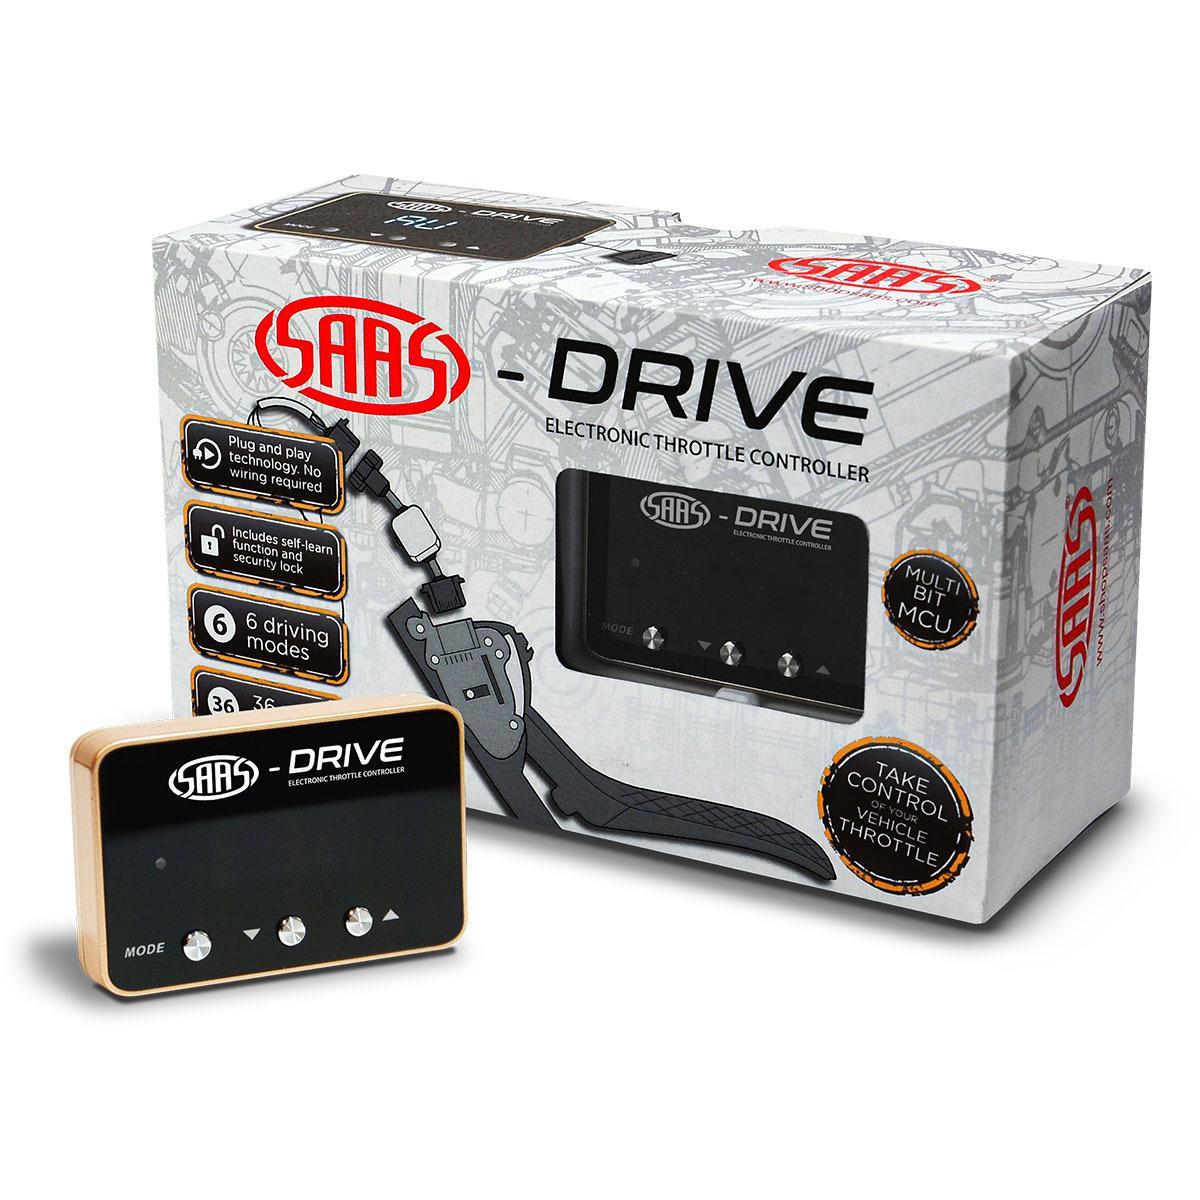 SAAS-Drive Throttle Controller For Peugeot 407 2008 >